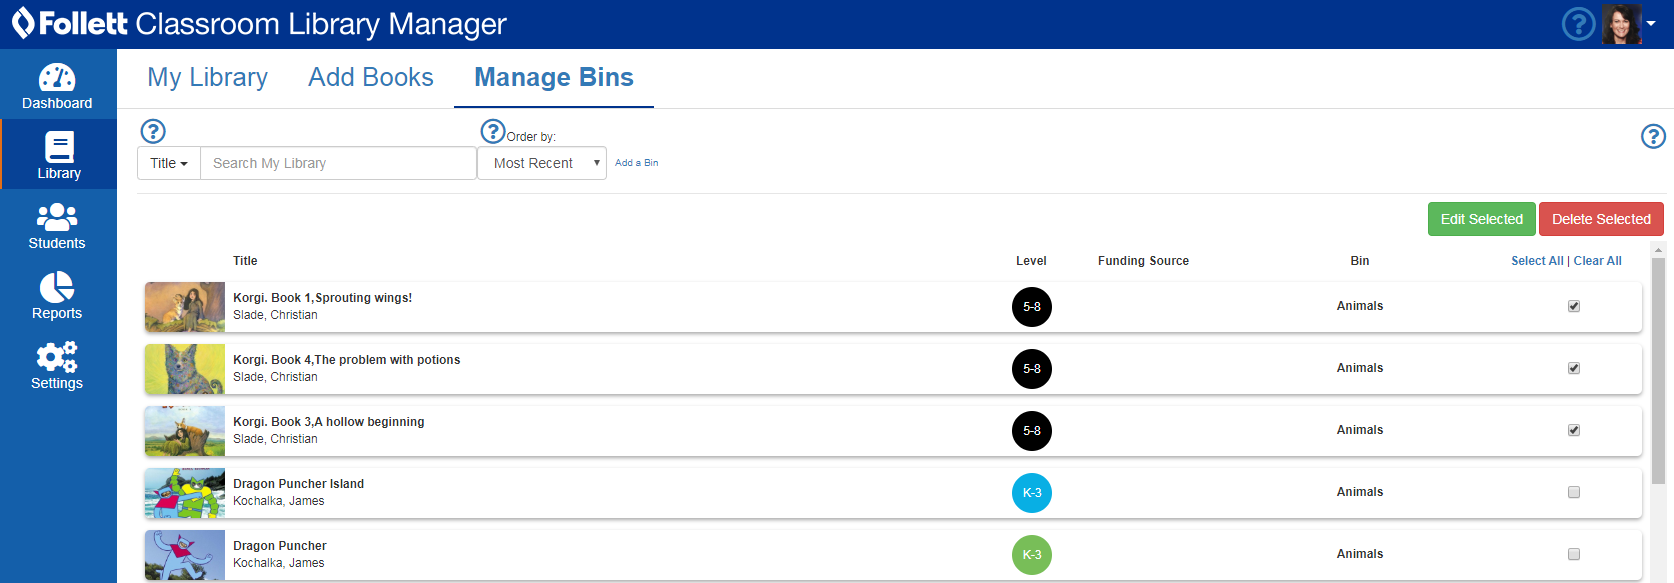 Library page with option to manage bins.